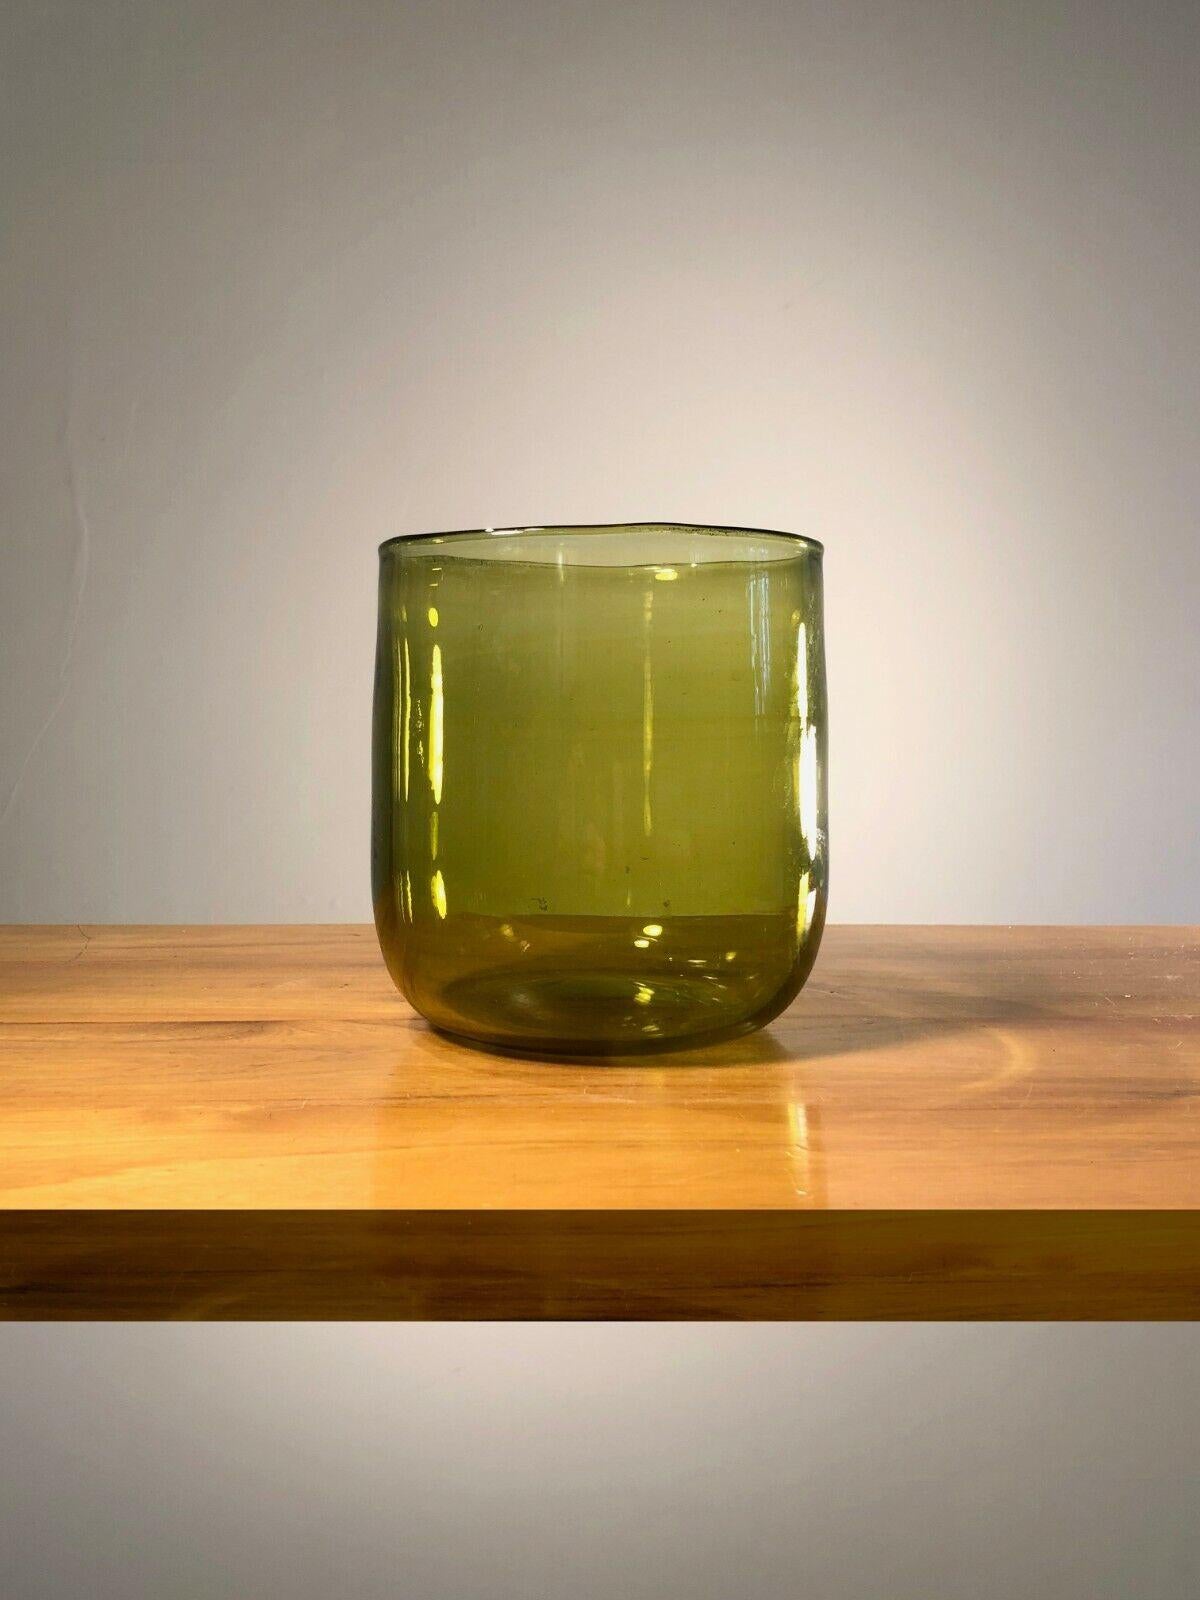 An exceptional large vase or pot, Modernist, Free-Form, in a beautiful yellowish kaki blown glass, by Claude Morin, signed Morin / Dieulefit, under the base... France 1970.